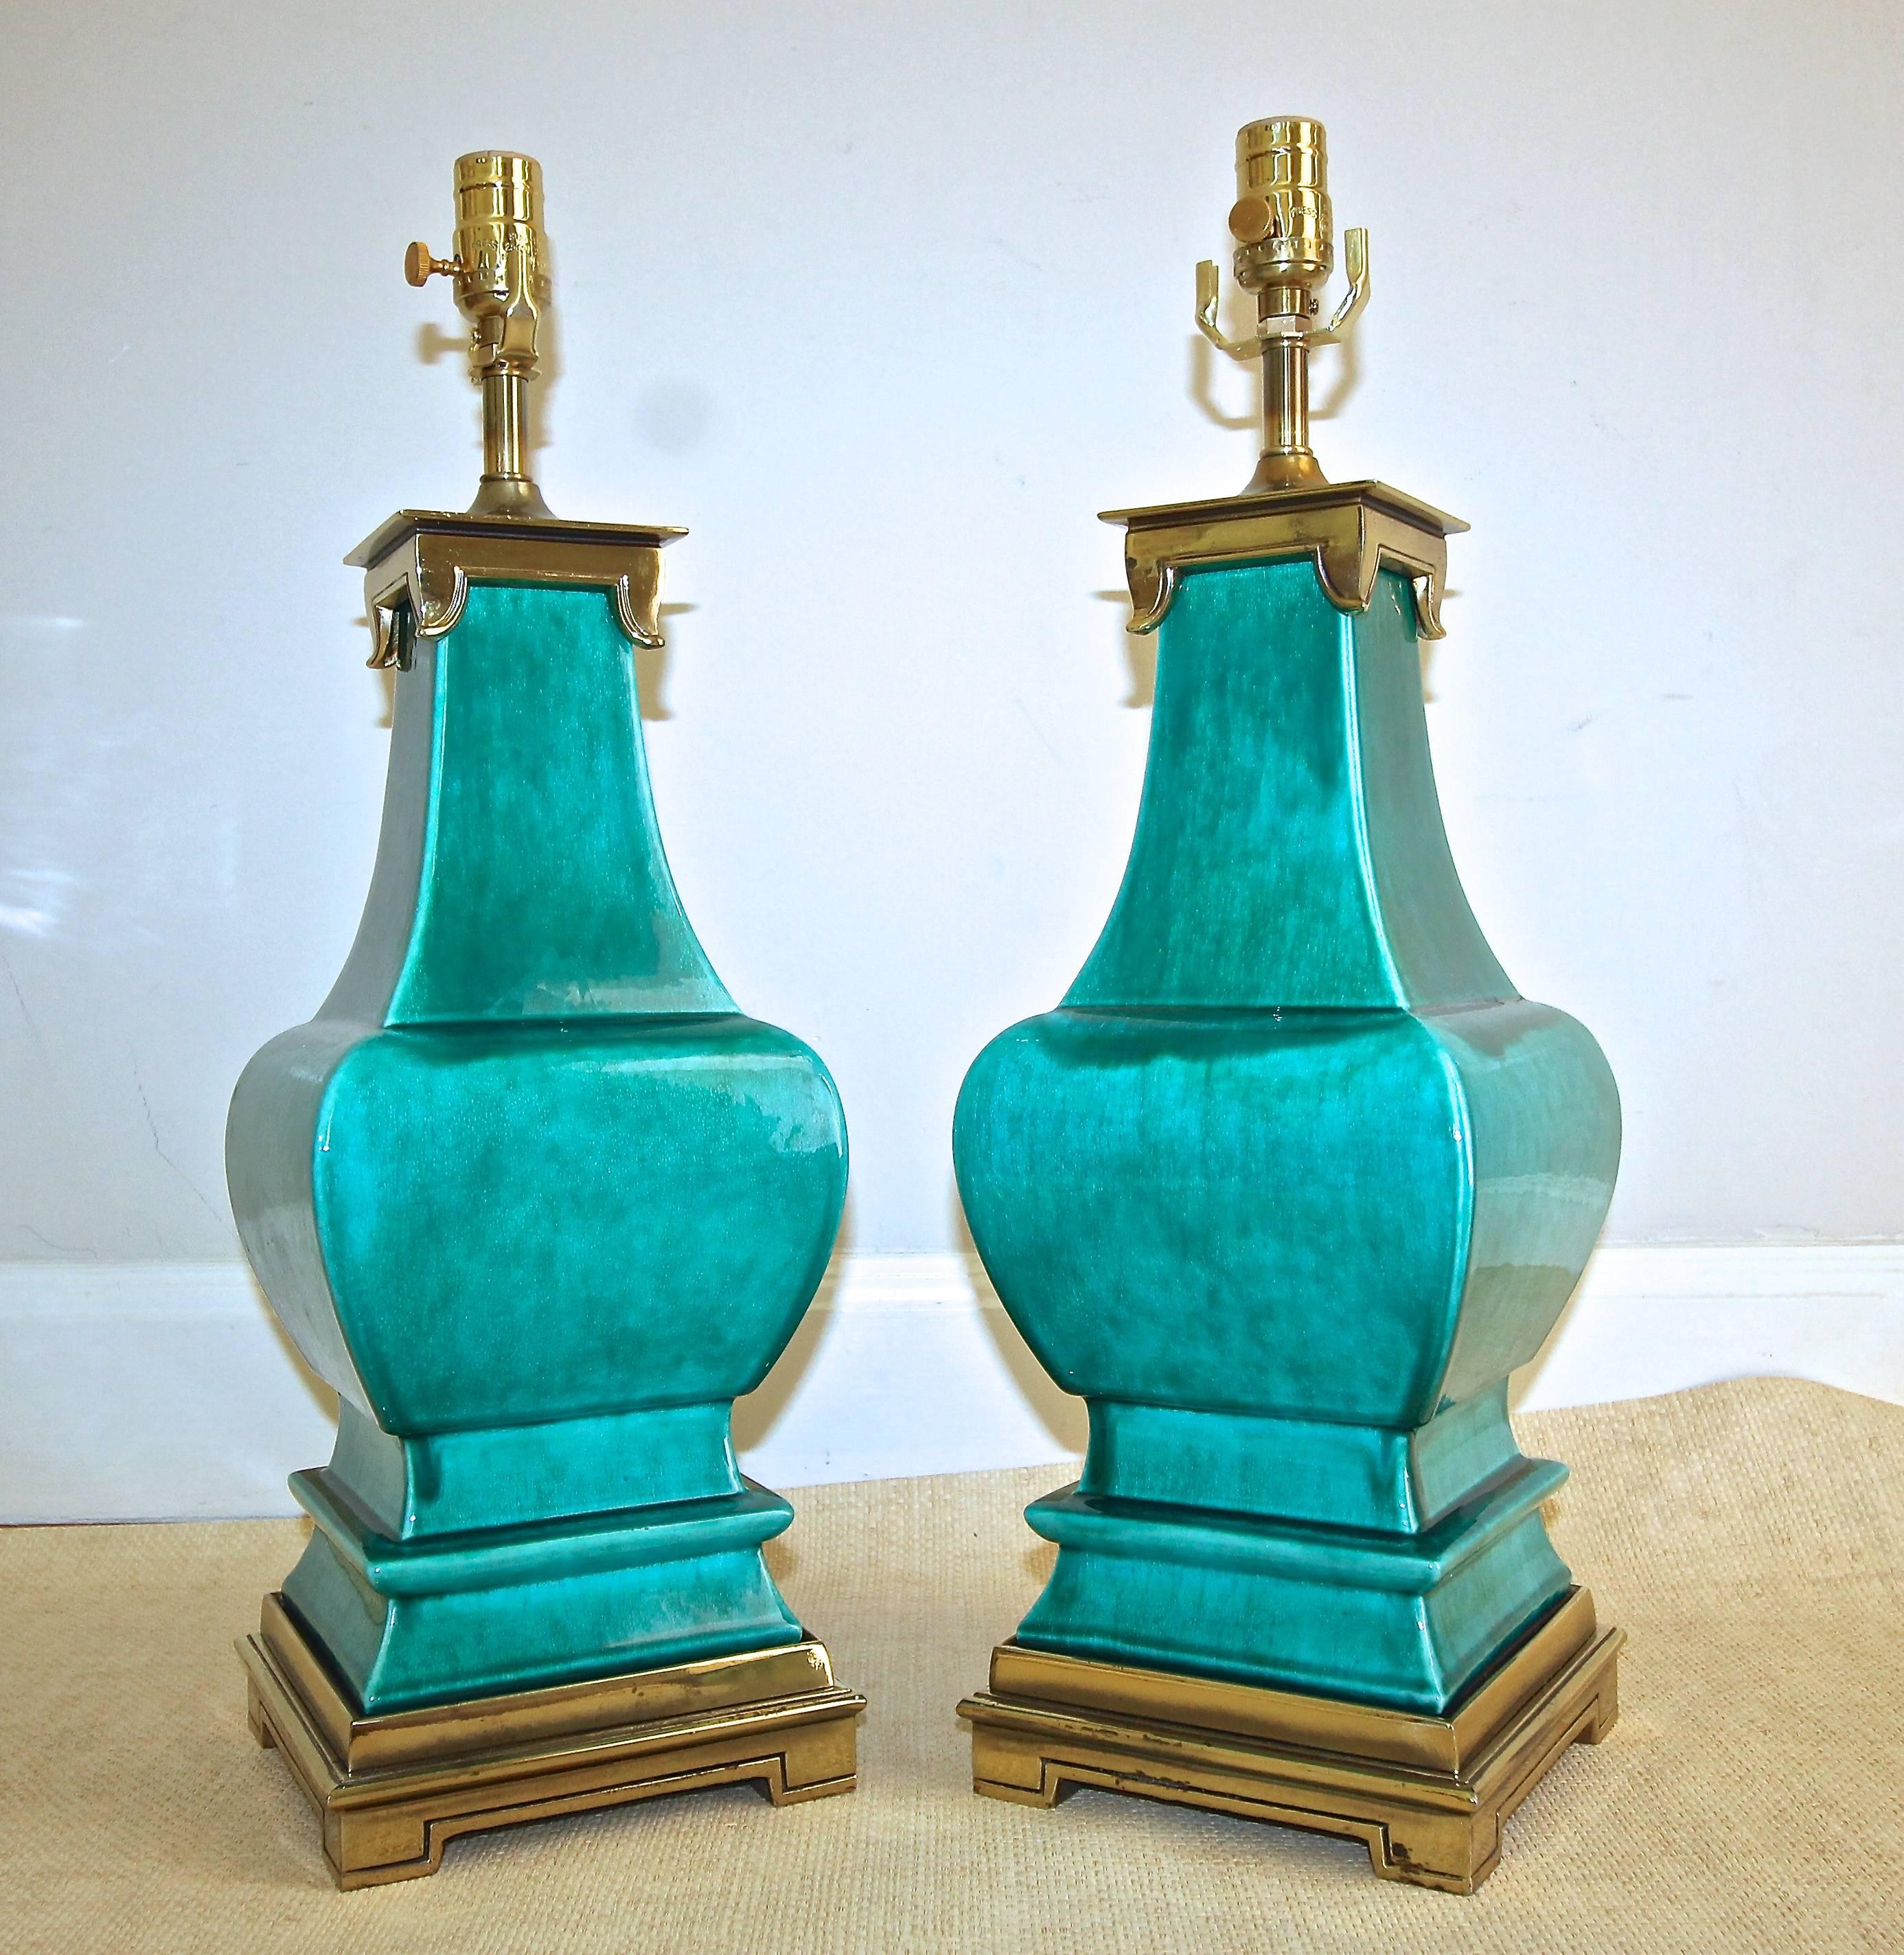 American Pair of Stiffel Asian Style Turquoise Ceramic Lamps